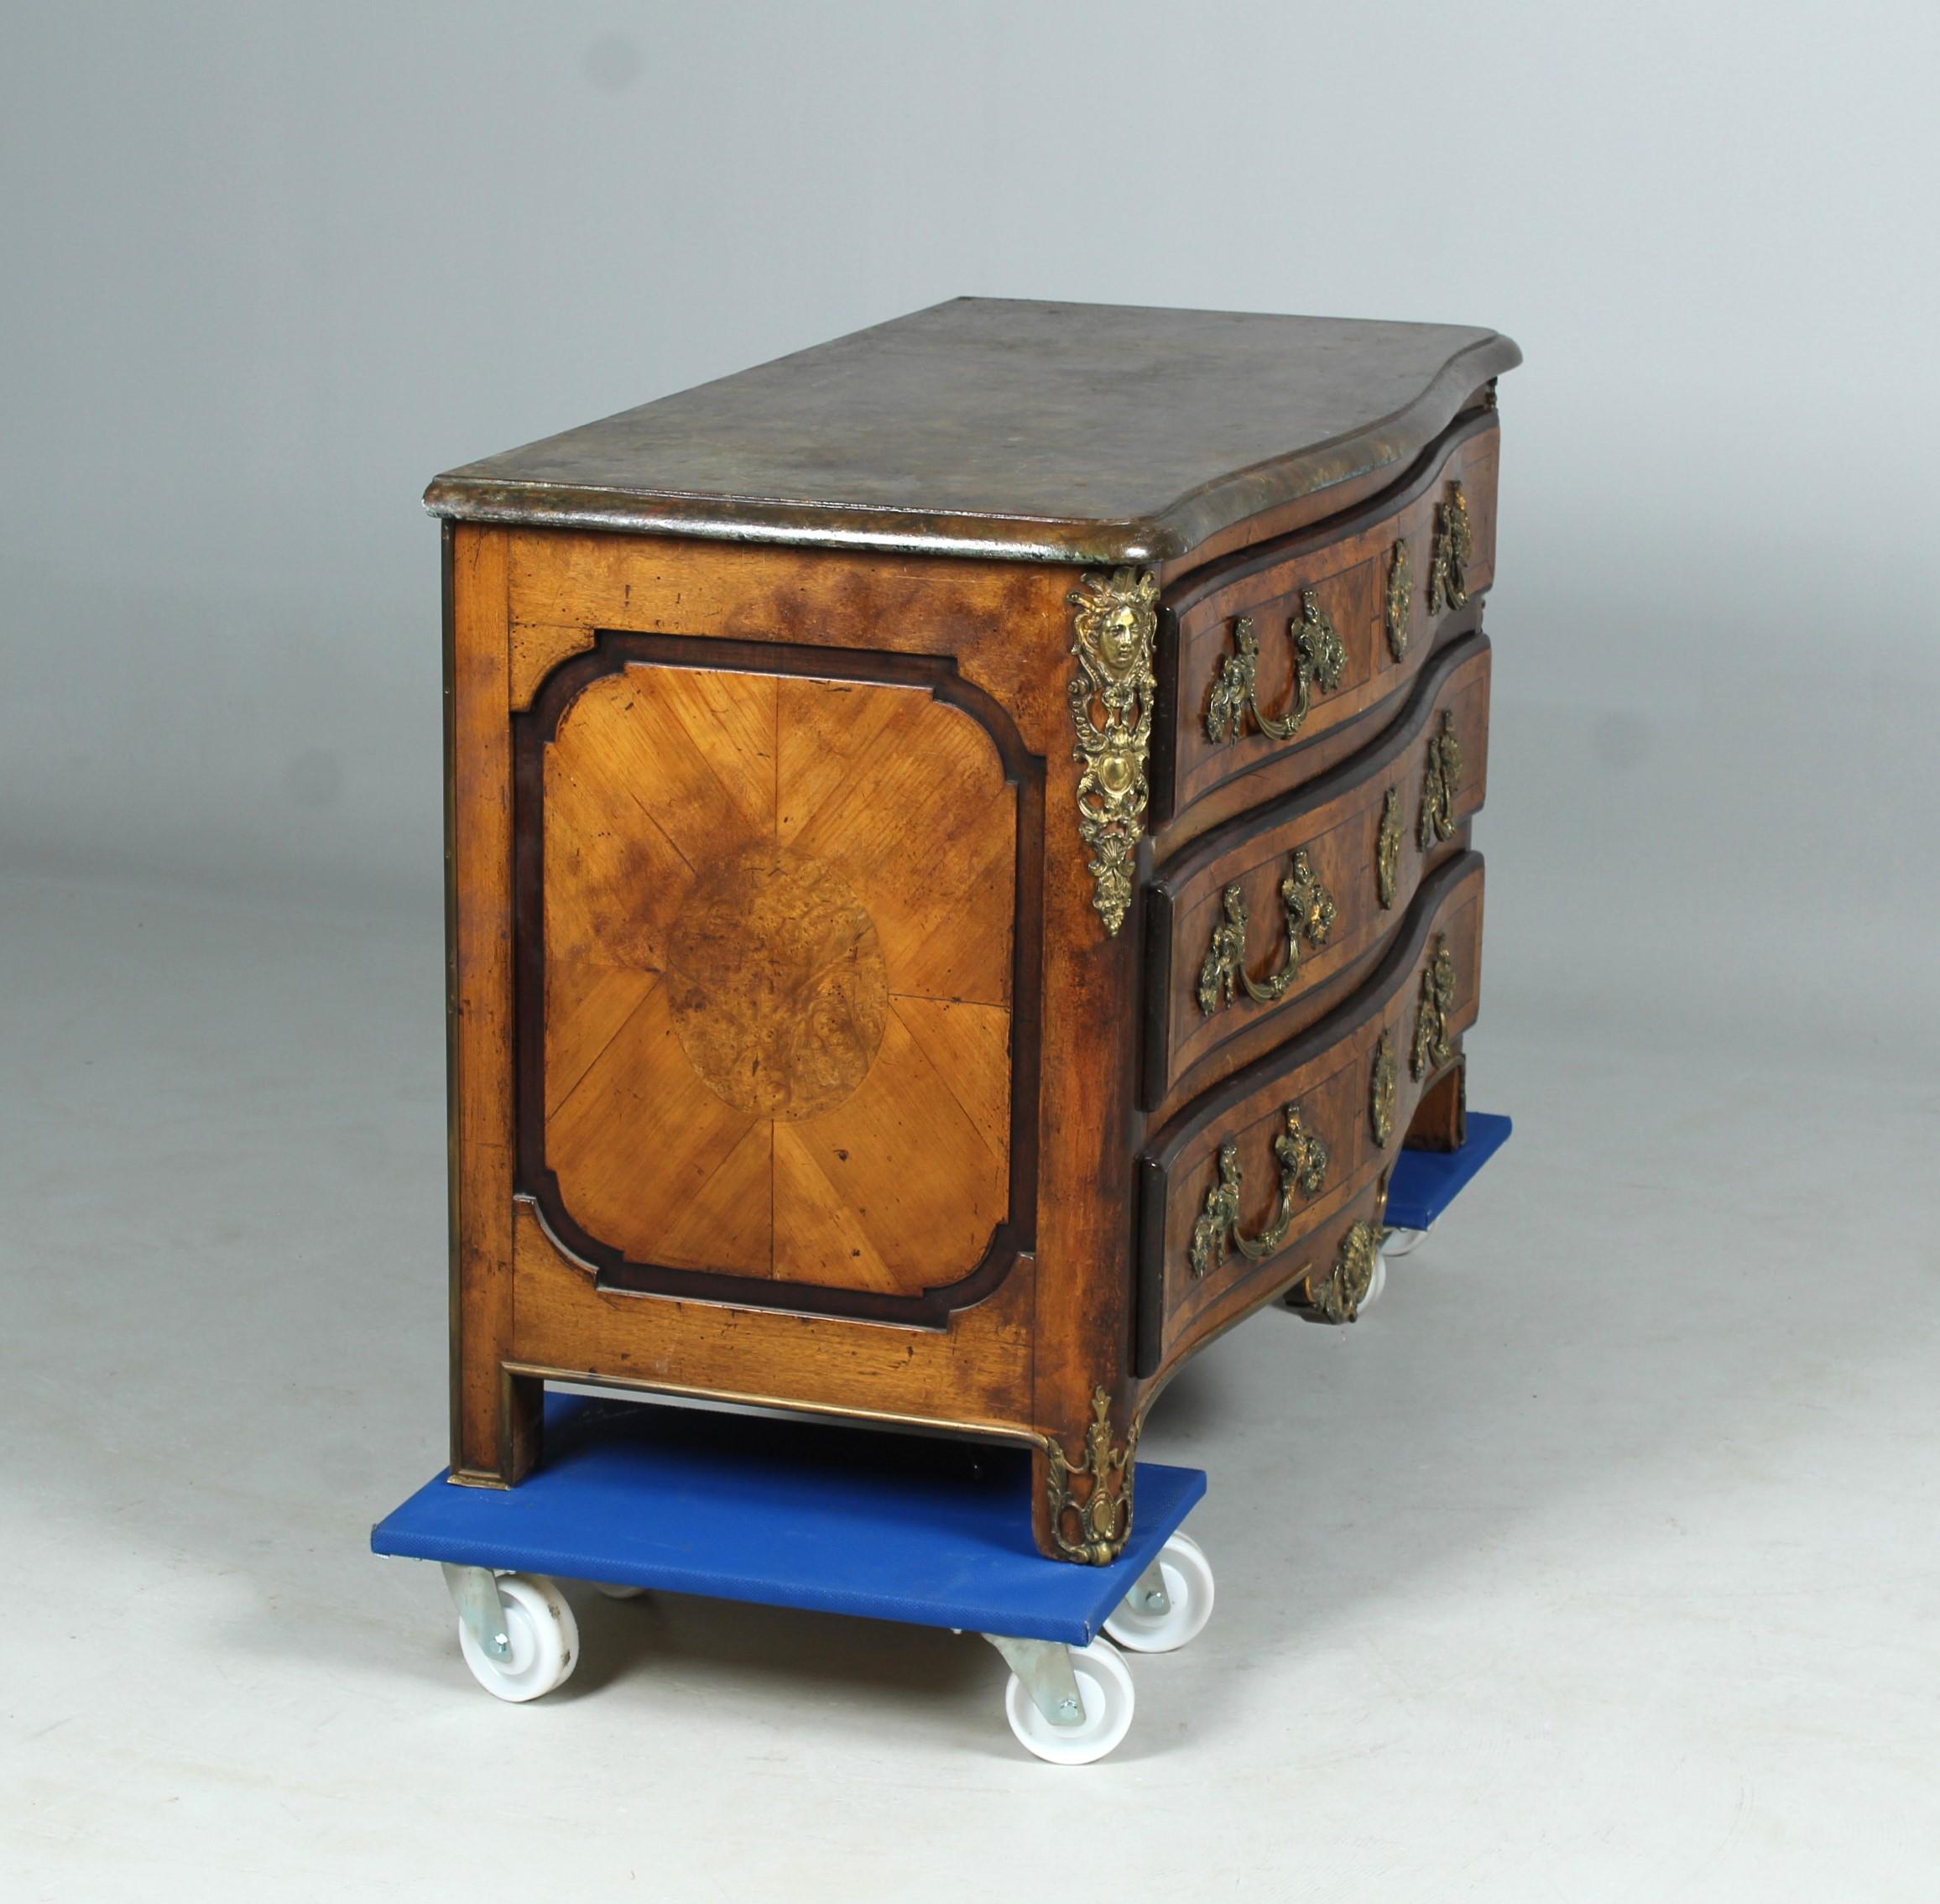 Unrestored Regence style chest of drawers made in France in the late 19th - or early 20th century.

Highly crafted piece of furniture with fine marquetry and impressive bronzes.
Loosely applied marbled granite top.

Dimensions: H x W x D: 82 x 130 x